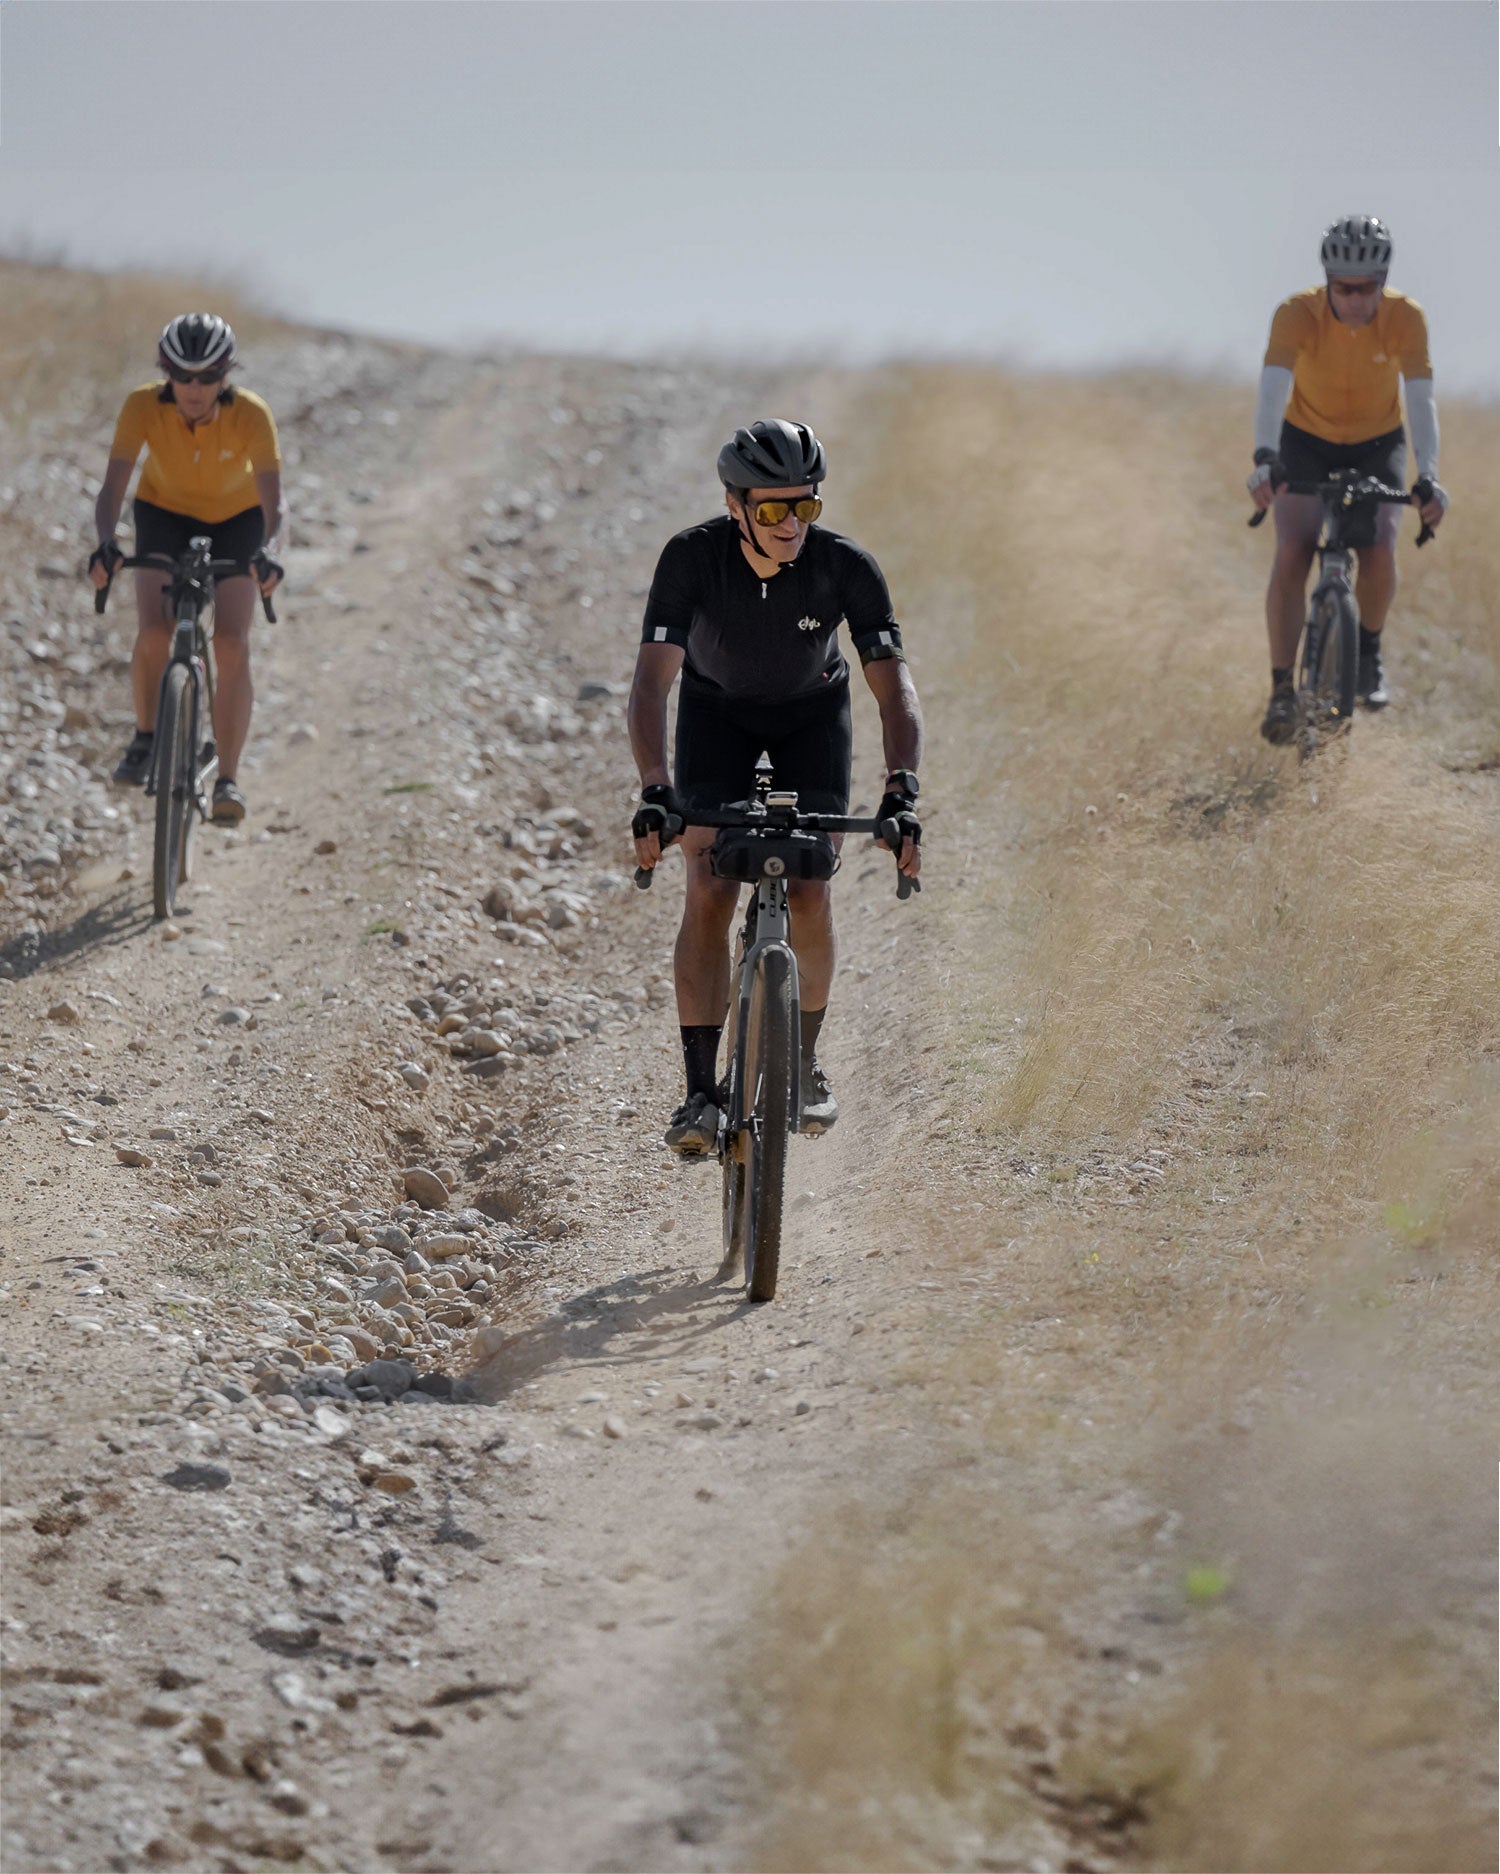 Sigr gravel cycling clothing in action